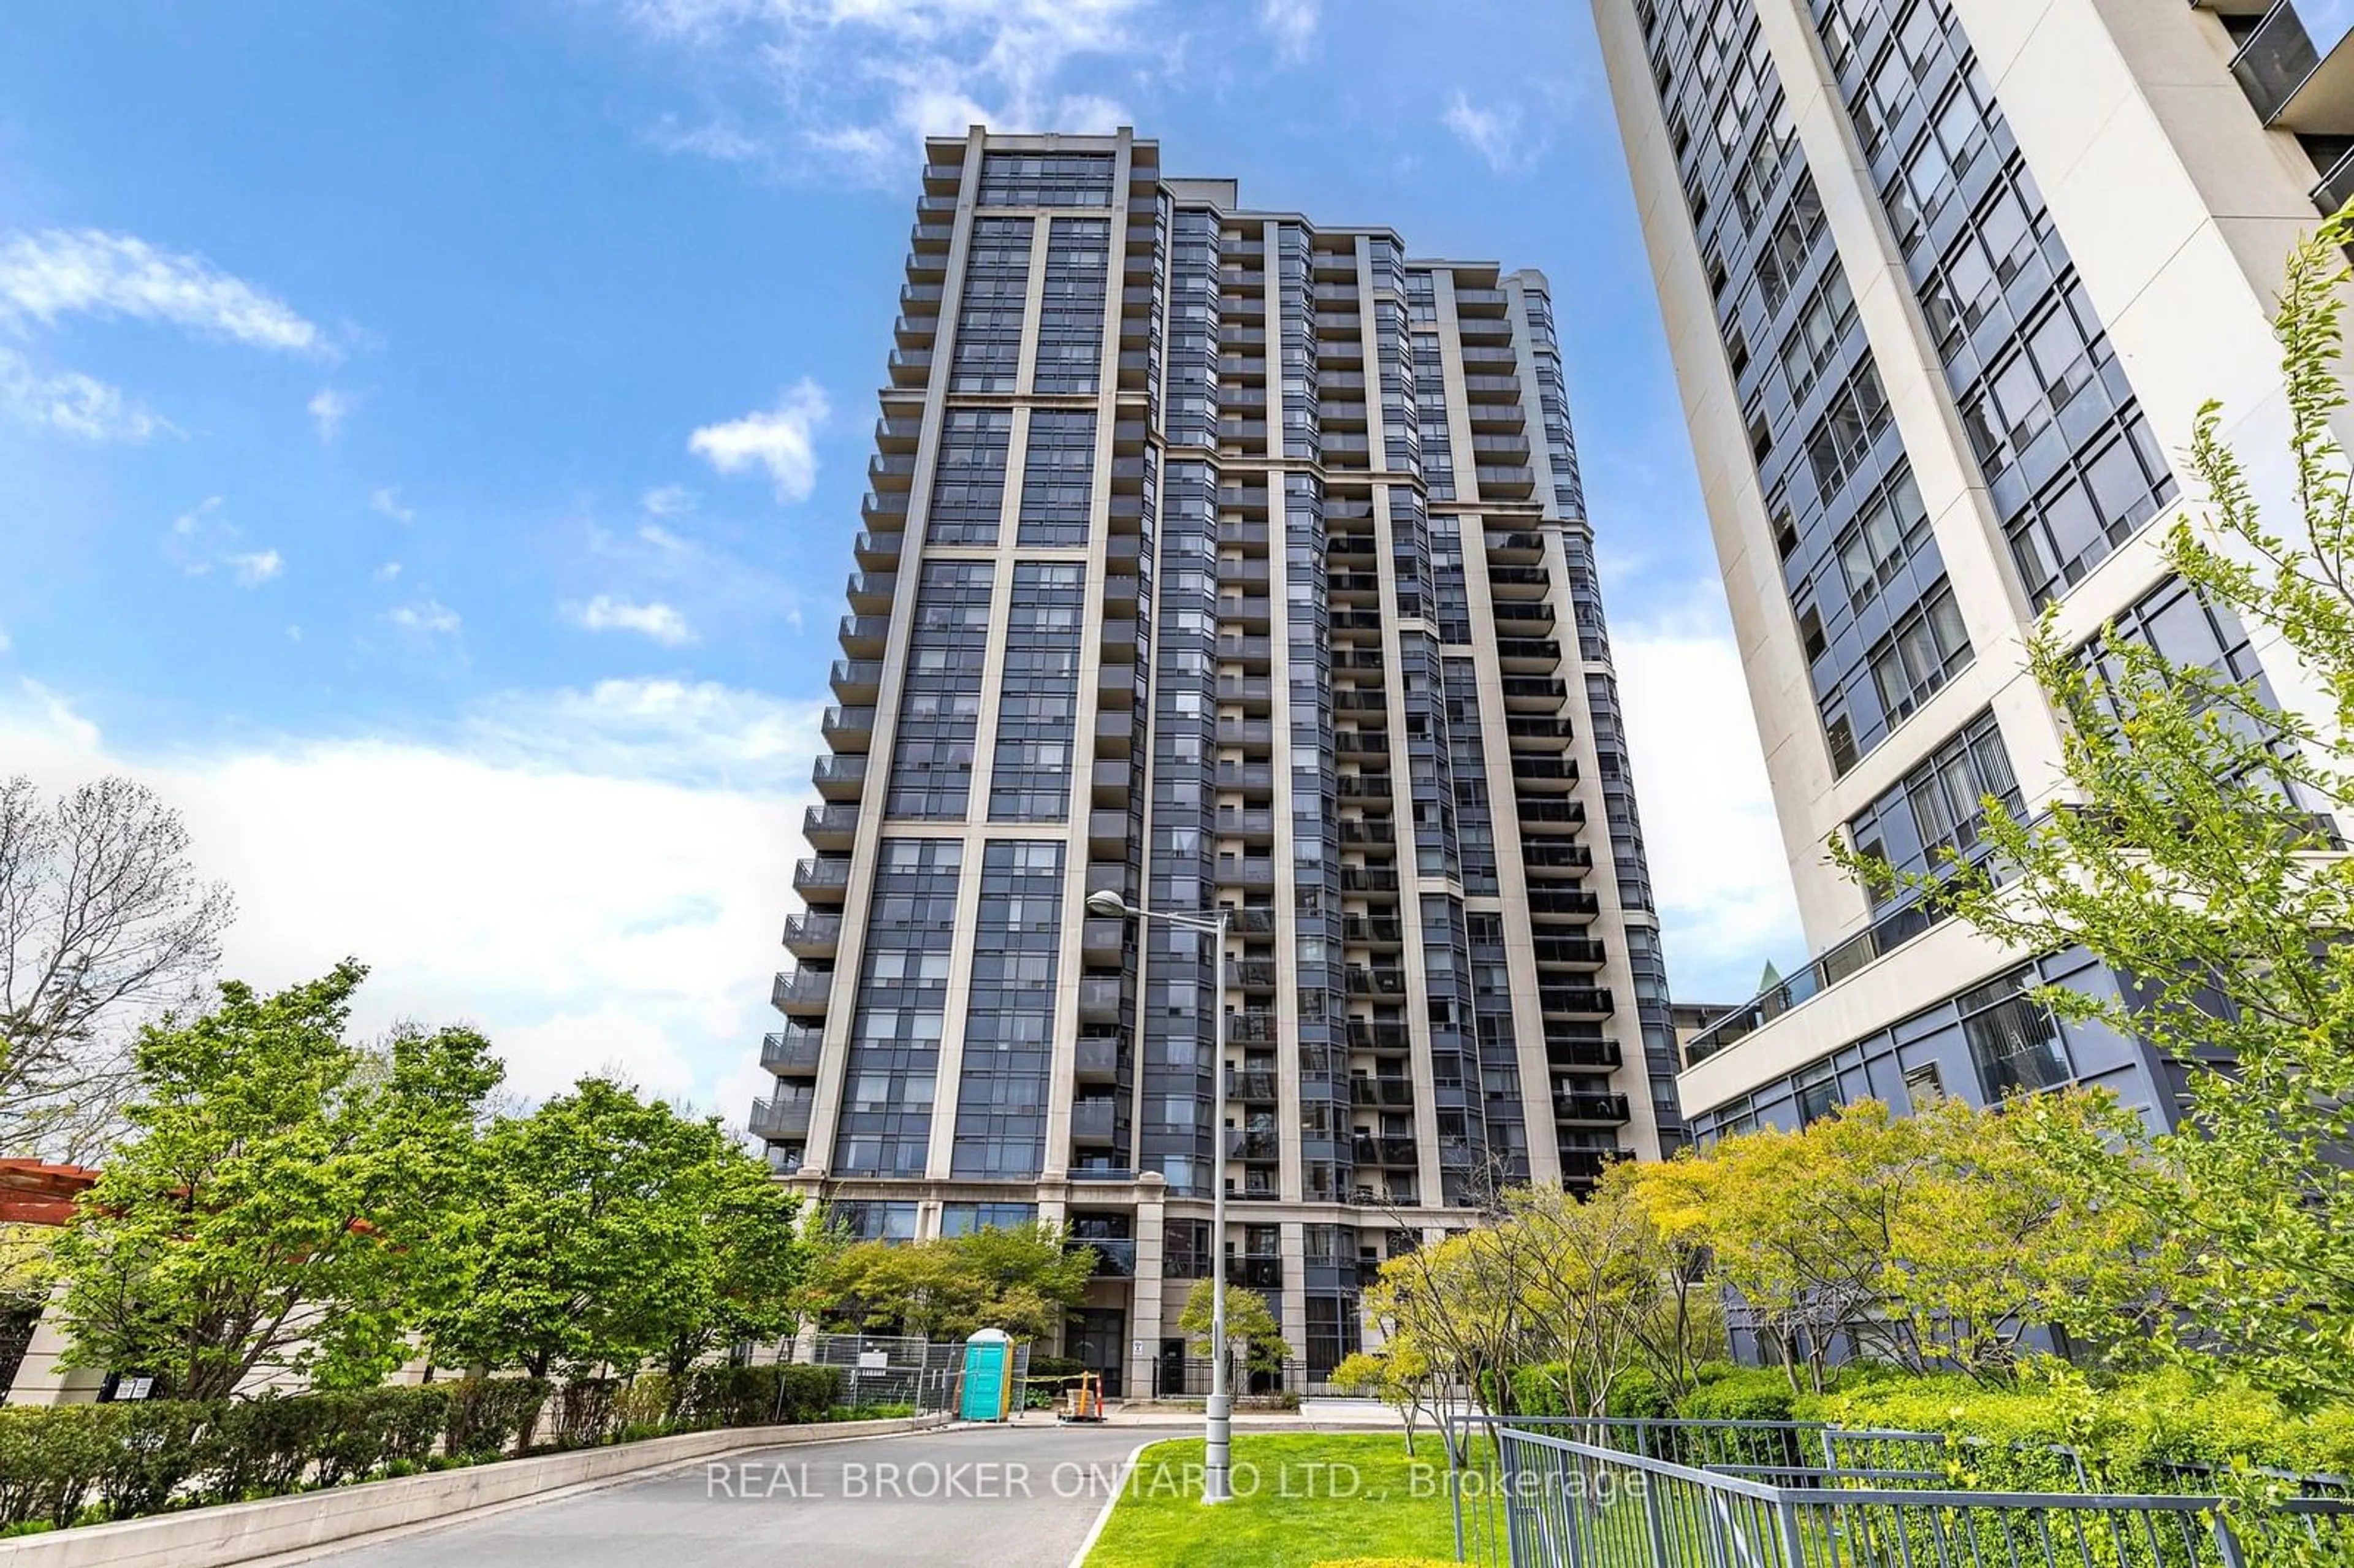 A pic from exterior of the house or condo for 153 Beecroft Rd #1008, Toronto Ontario M2N 7C5